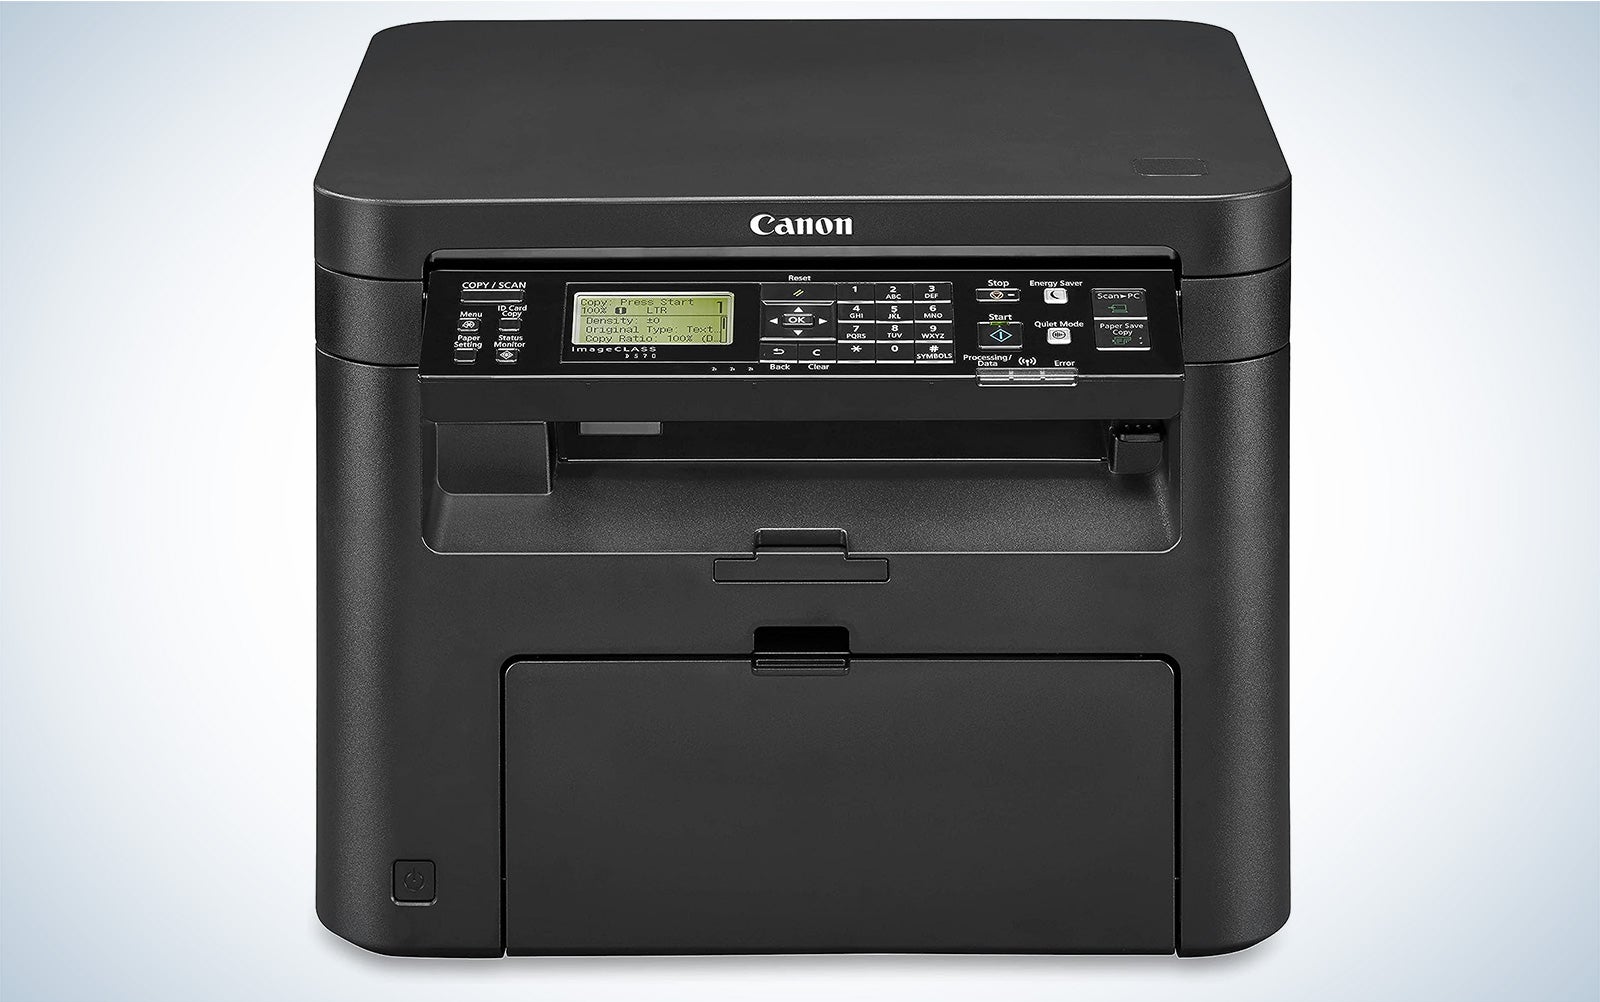 Canon Image Class D570 Monochrome Laser Printer with Scanner and Copier